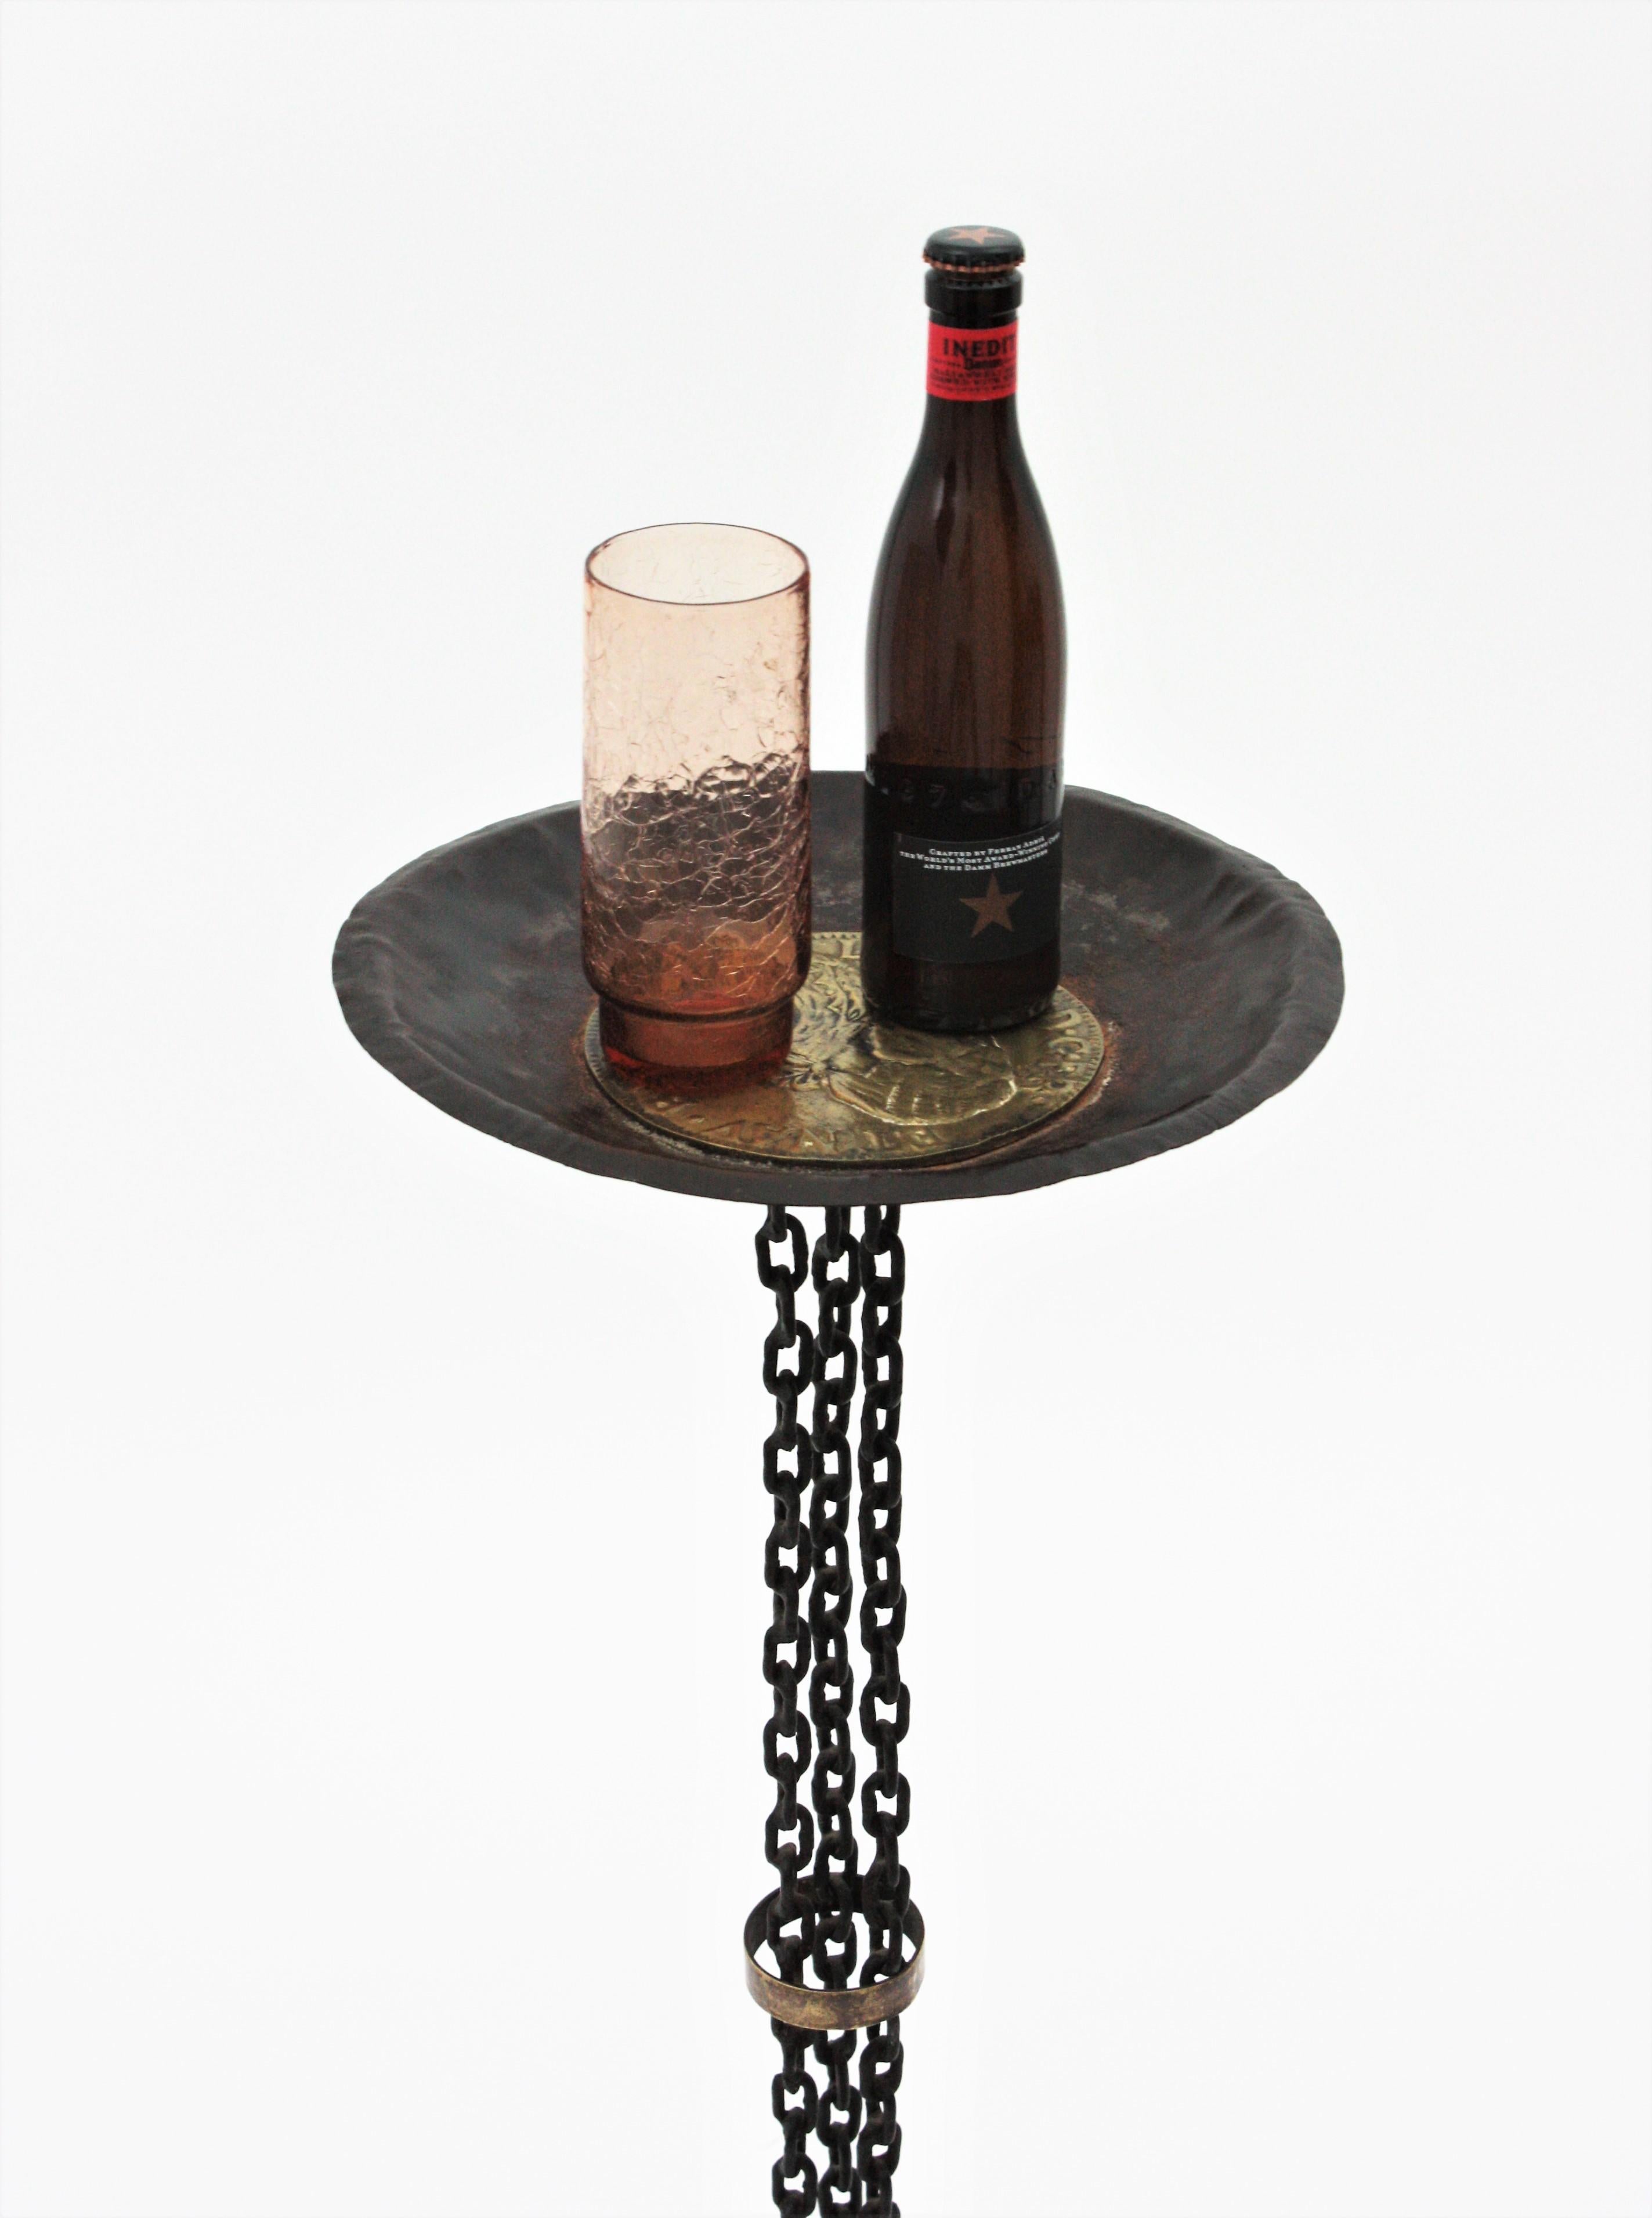 Forged French Chain Link Gueridon Drinks Table or Side Table in Iron and Brass